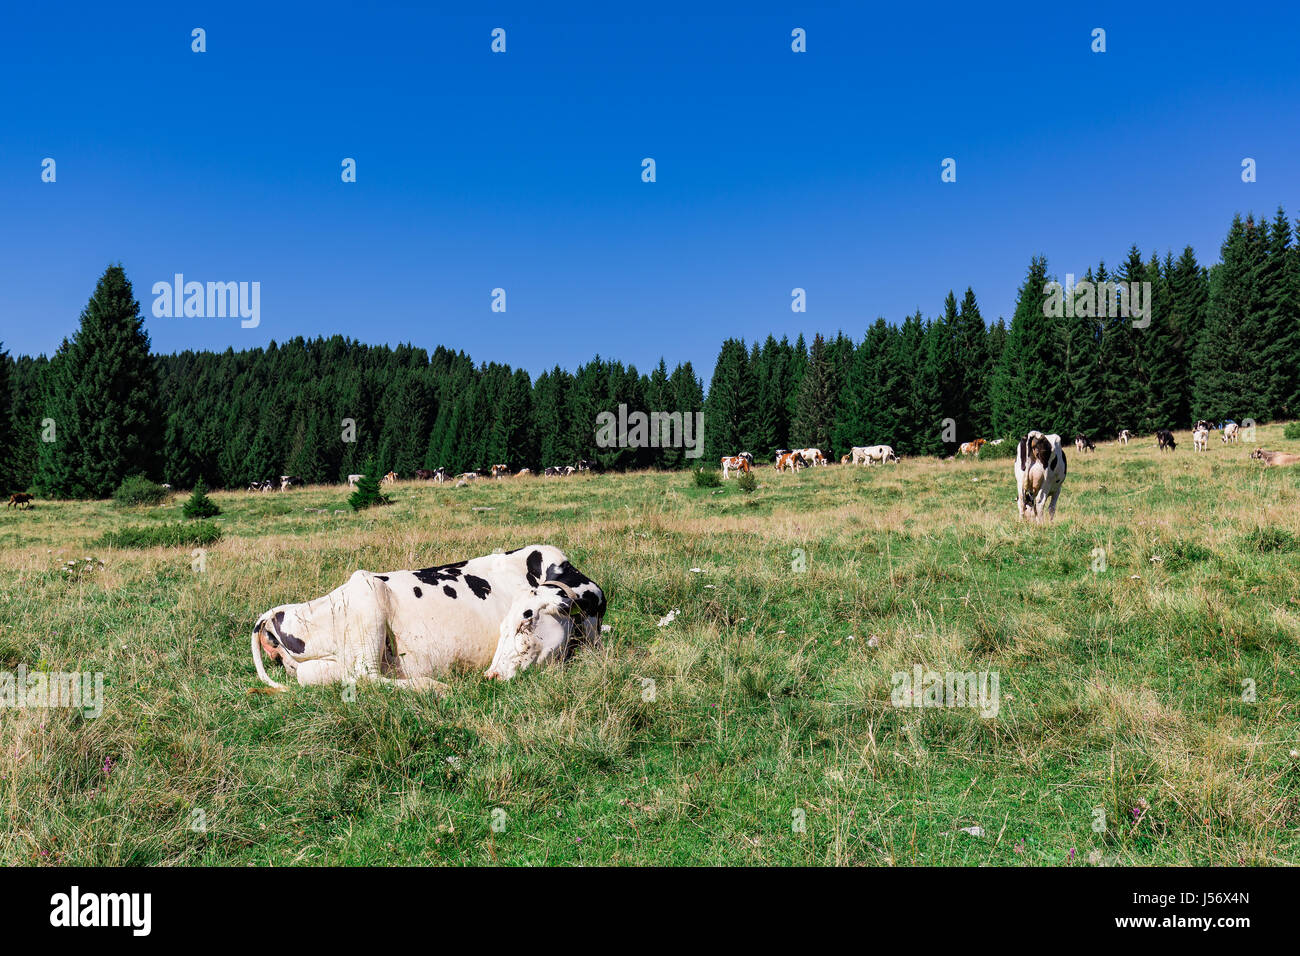 Spotted Cow Sitting In A Field Stock Photo